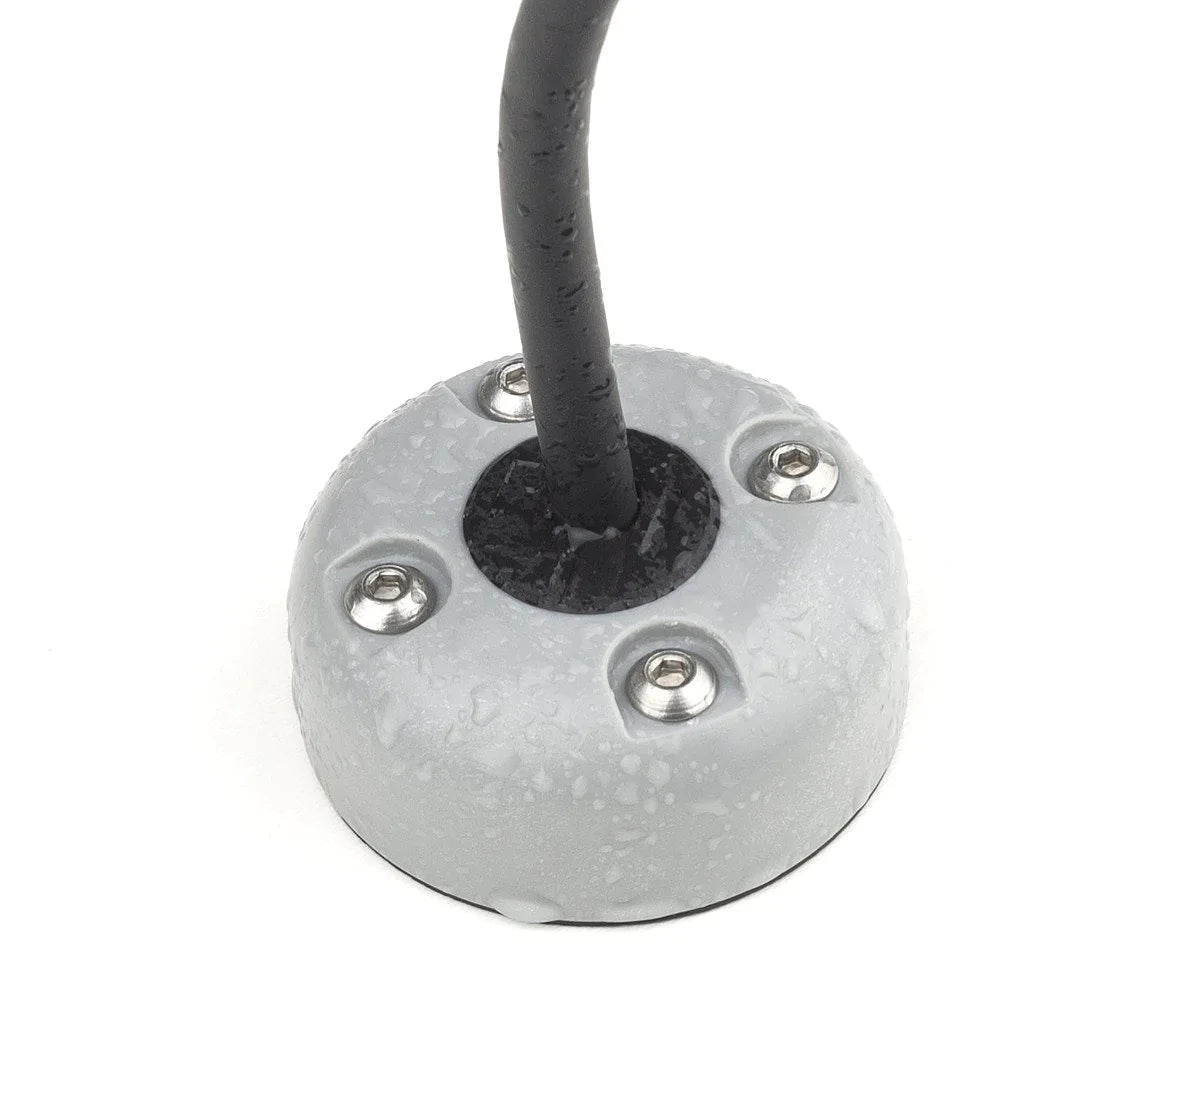 Metal-plastic 16 Mm Fitting Connector with Changeable O-rings